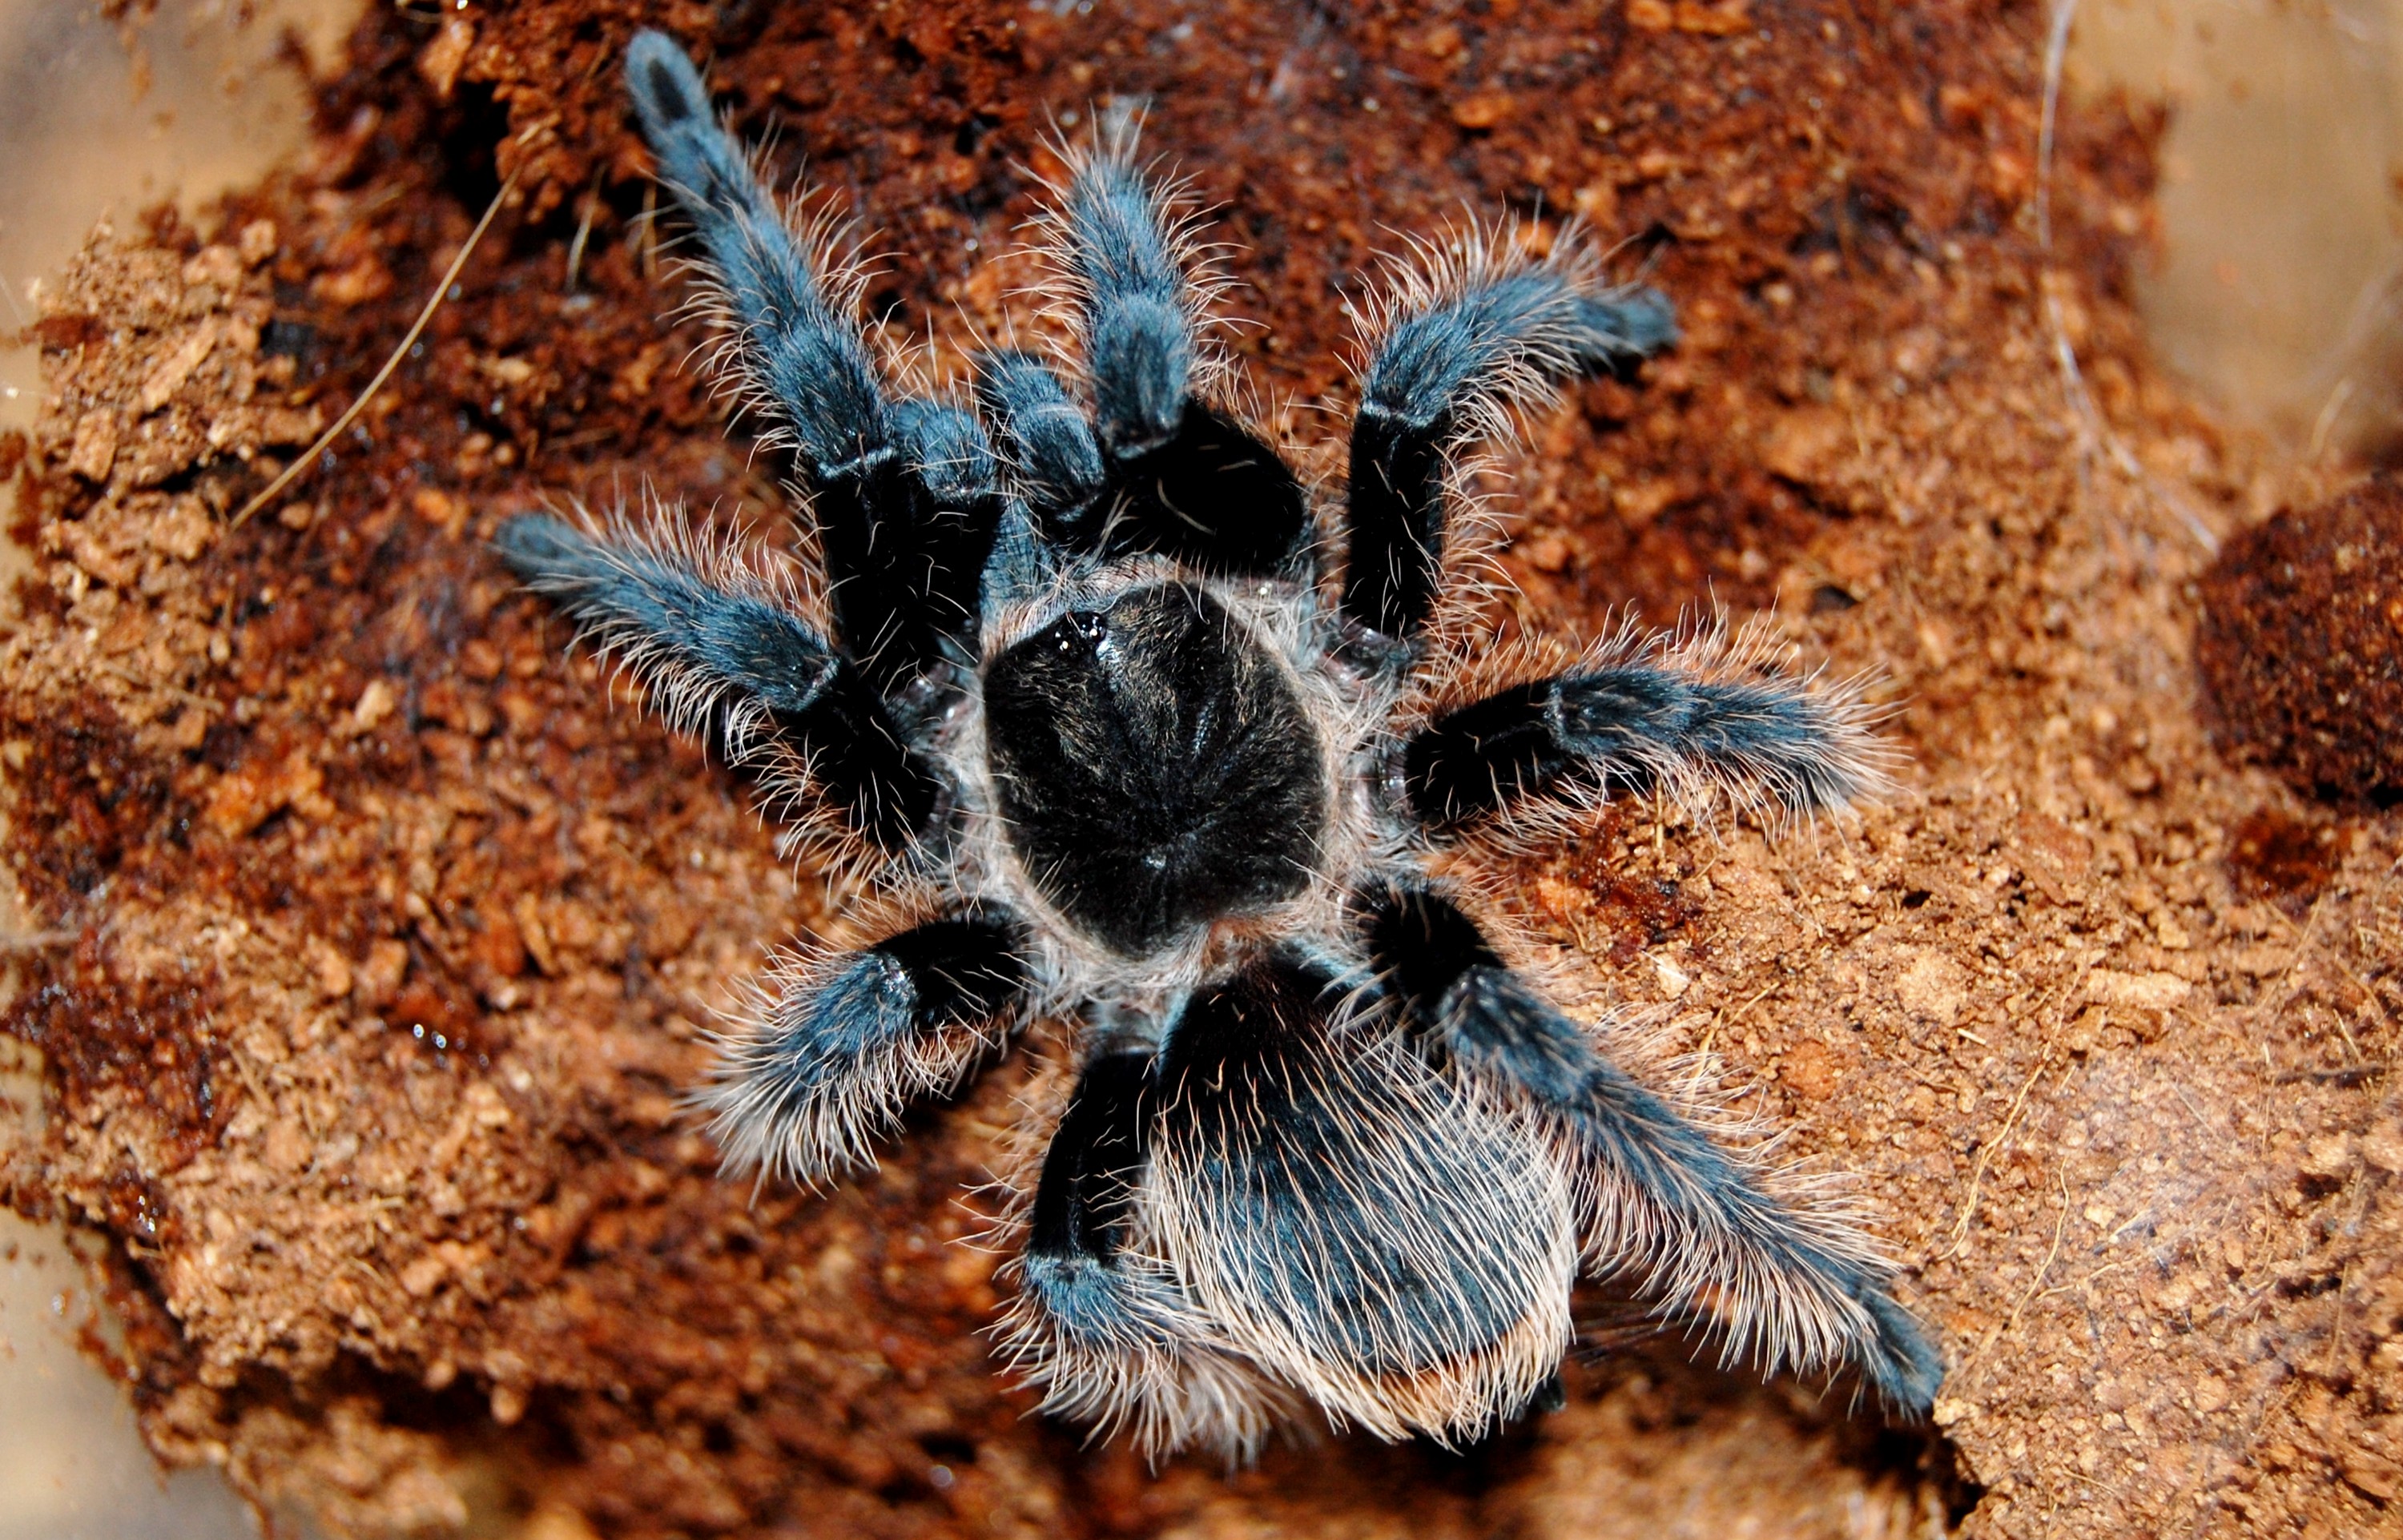 Hdq Tarantula Images Collection For Desktop , HD Wallpaper & Backgrounds